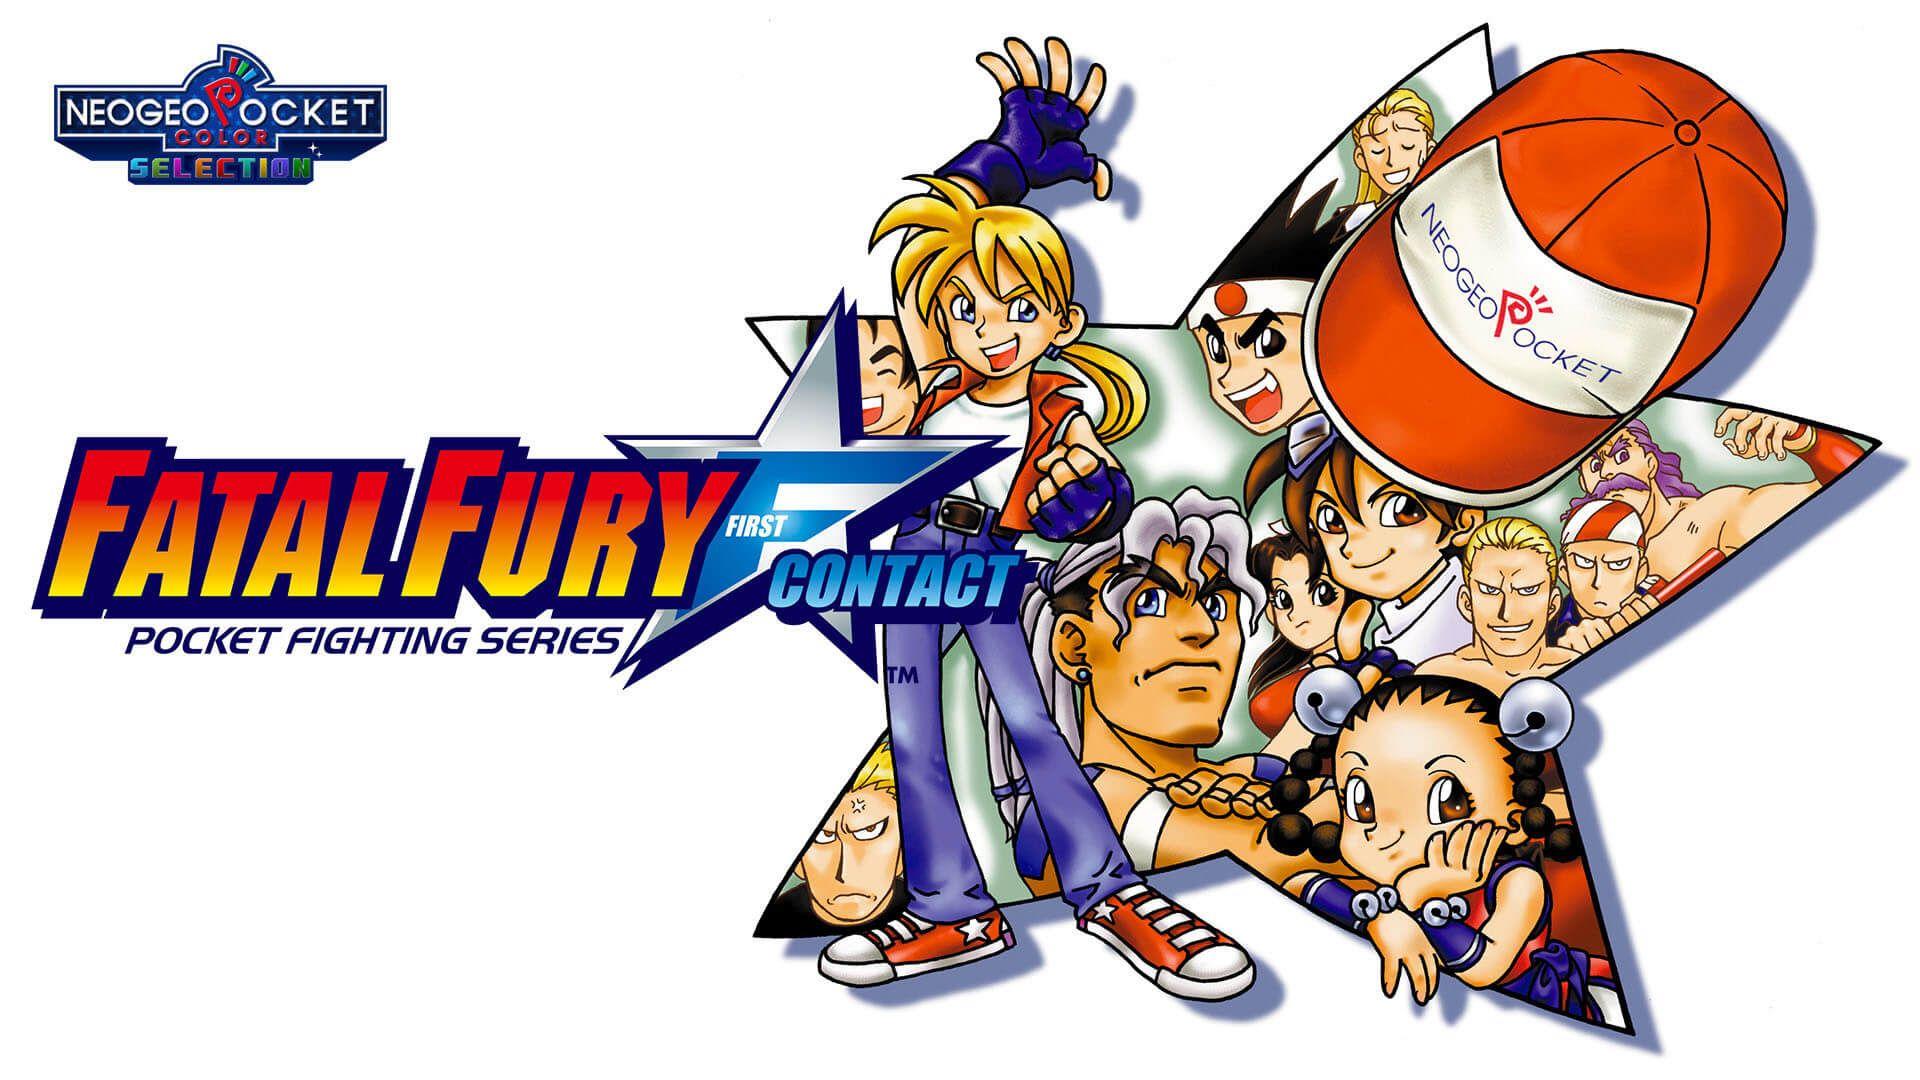 Fatal Fury First Contact Image